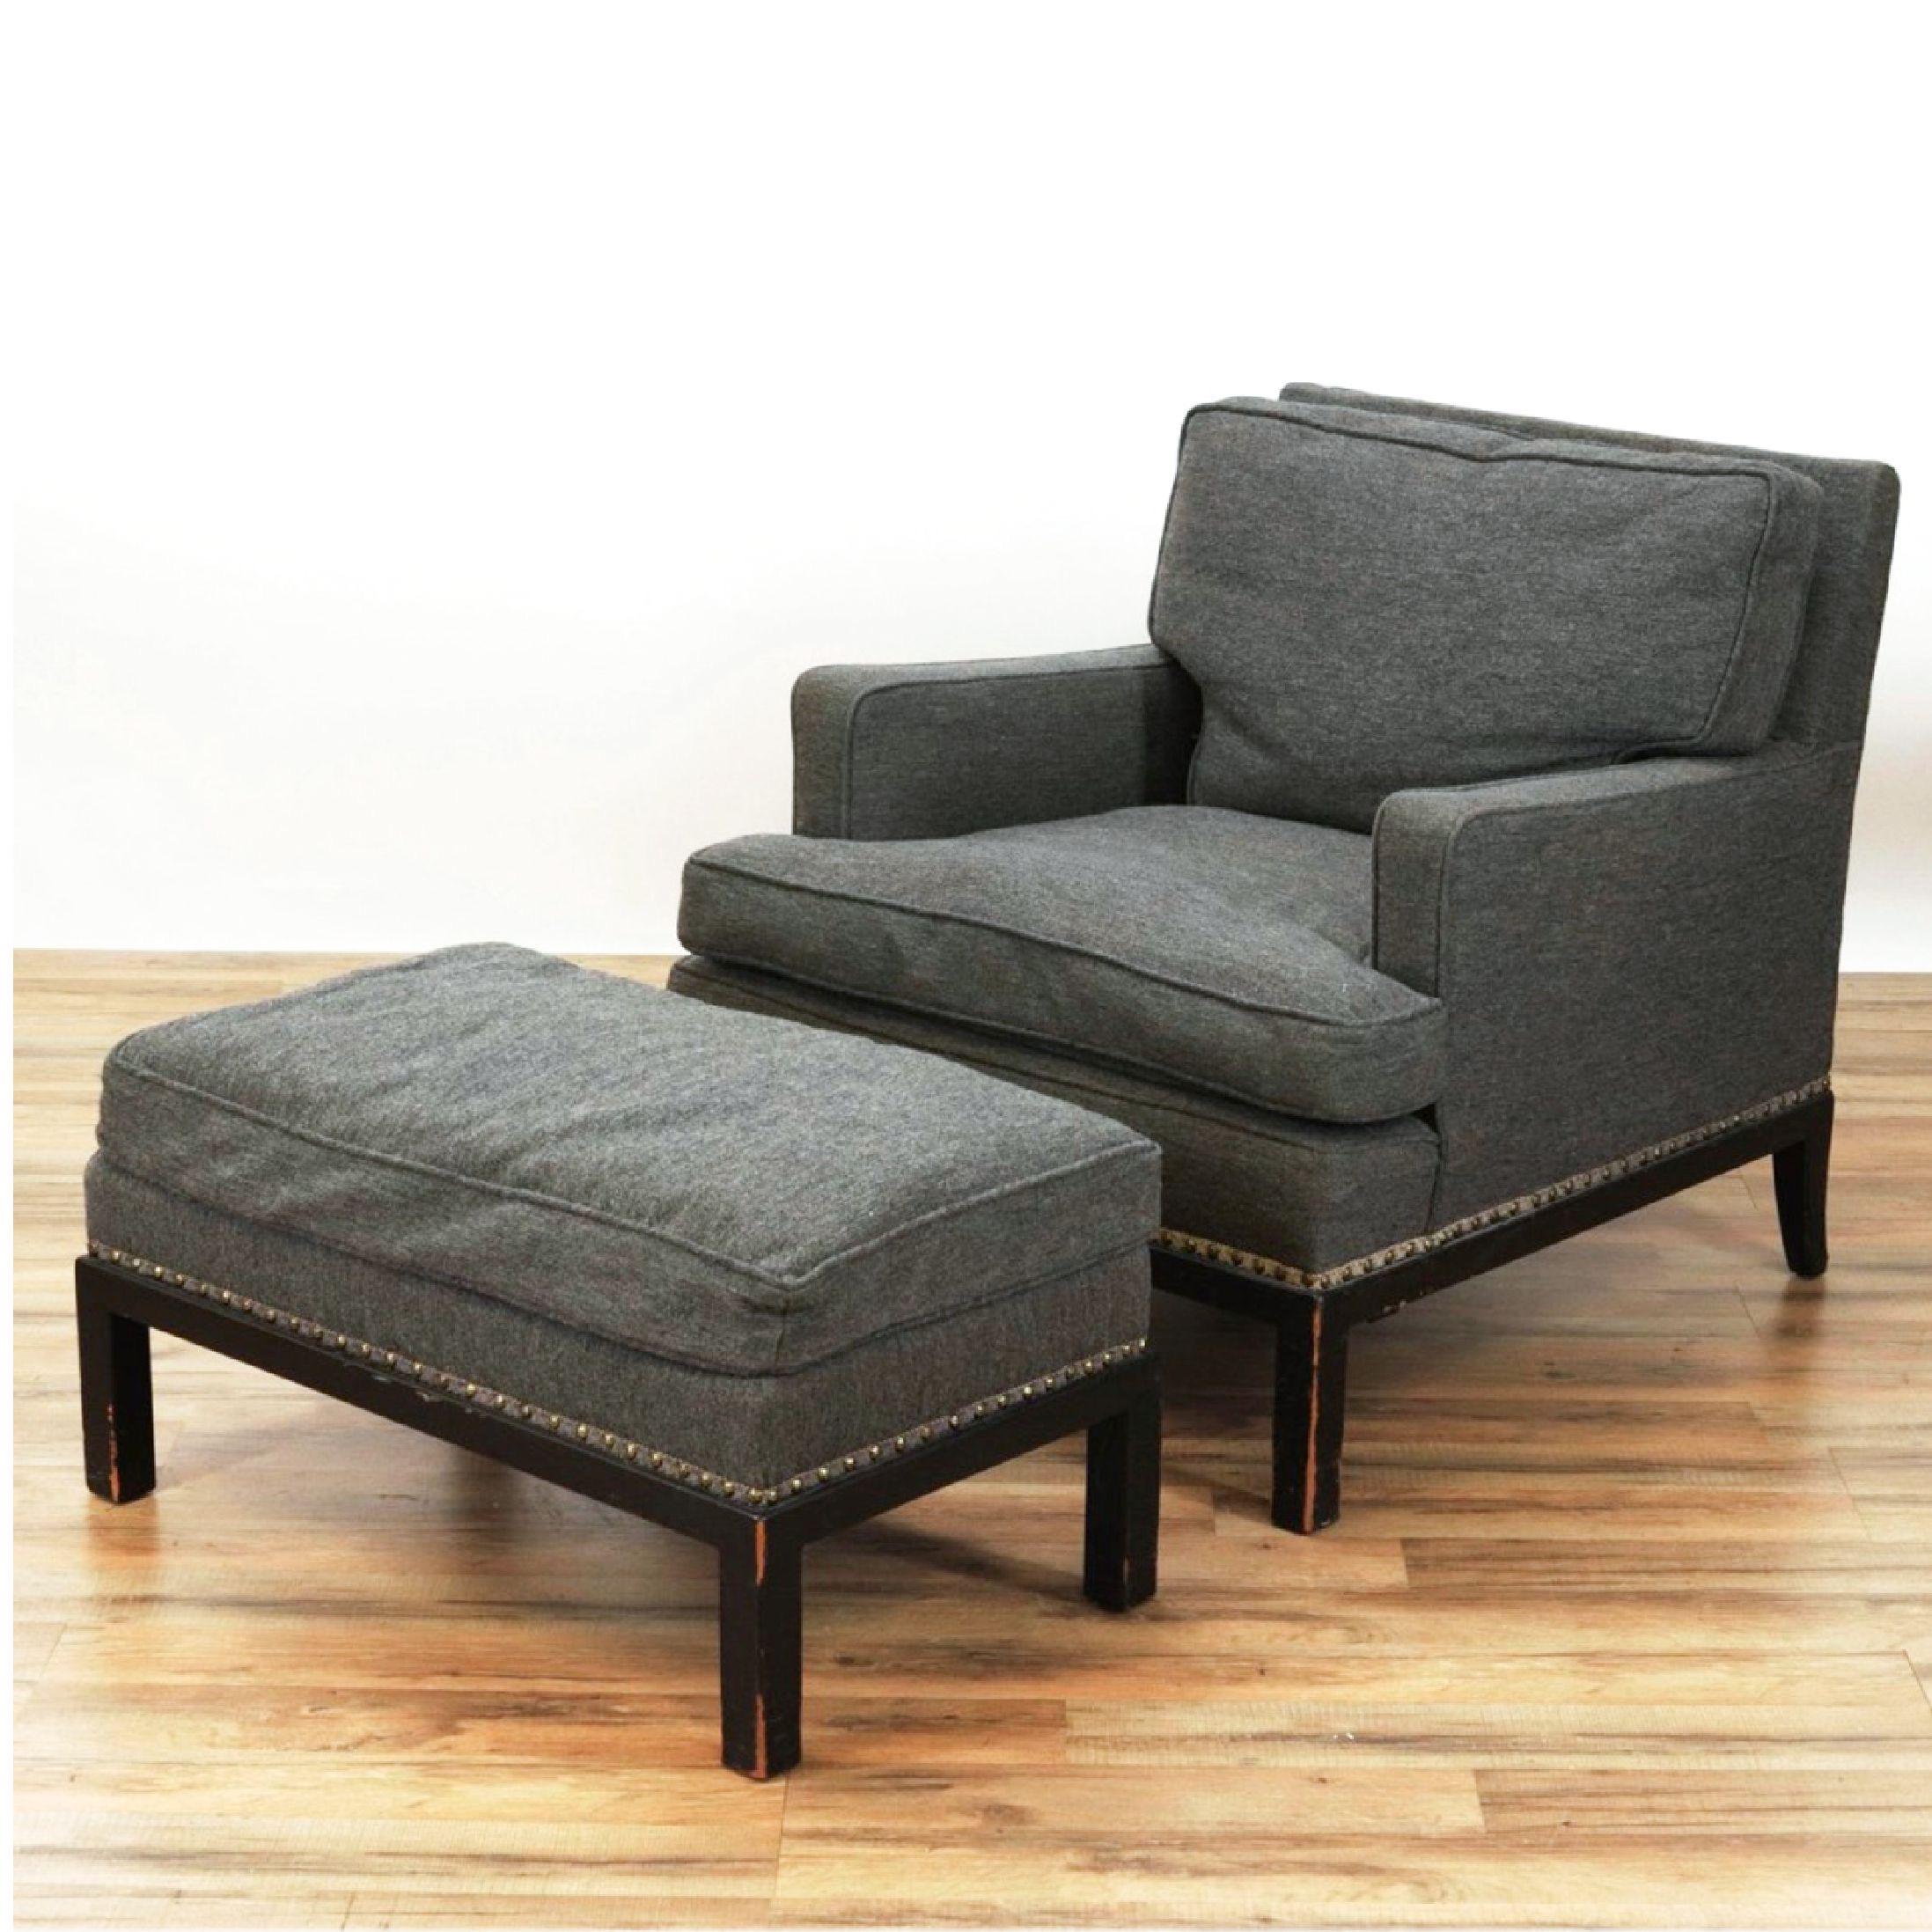 American Tommi Parzinger Originals Modern Armchair and Ottoman, Club Chair, 1958 For Sale